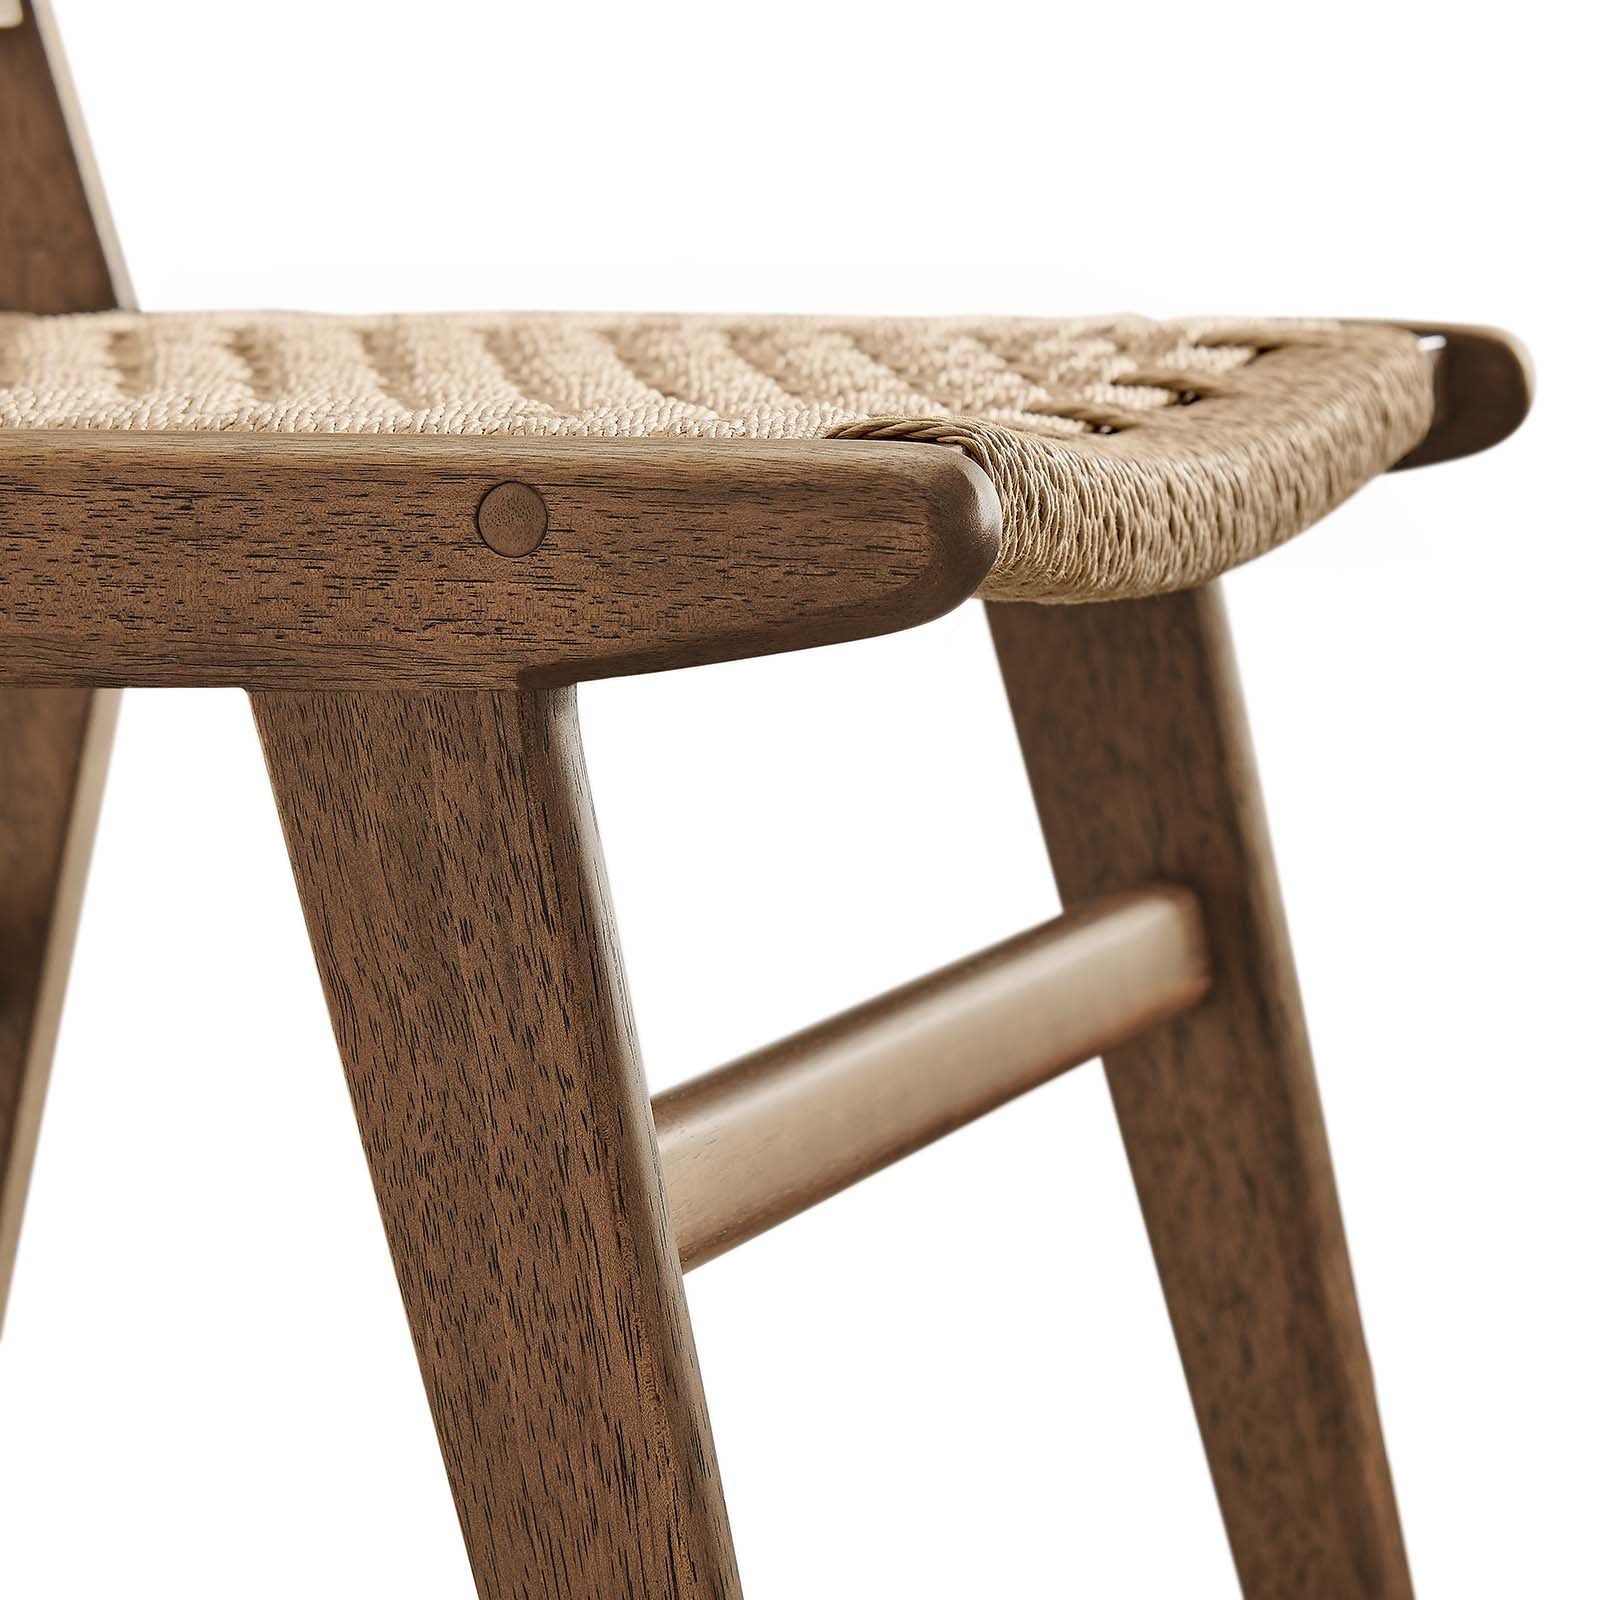 Saoirse Woven Rope Wood Accent Lounge Chair - Natural Natural